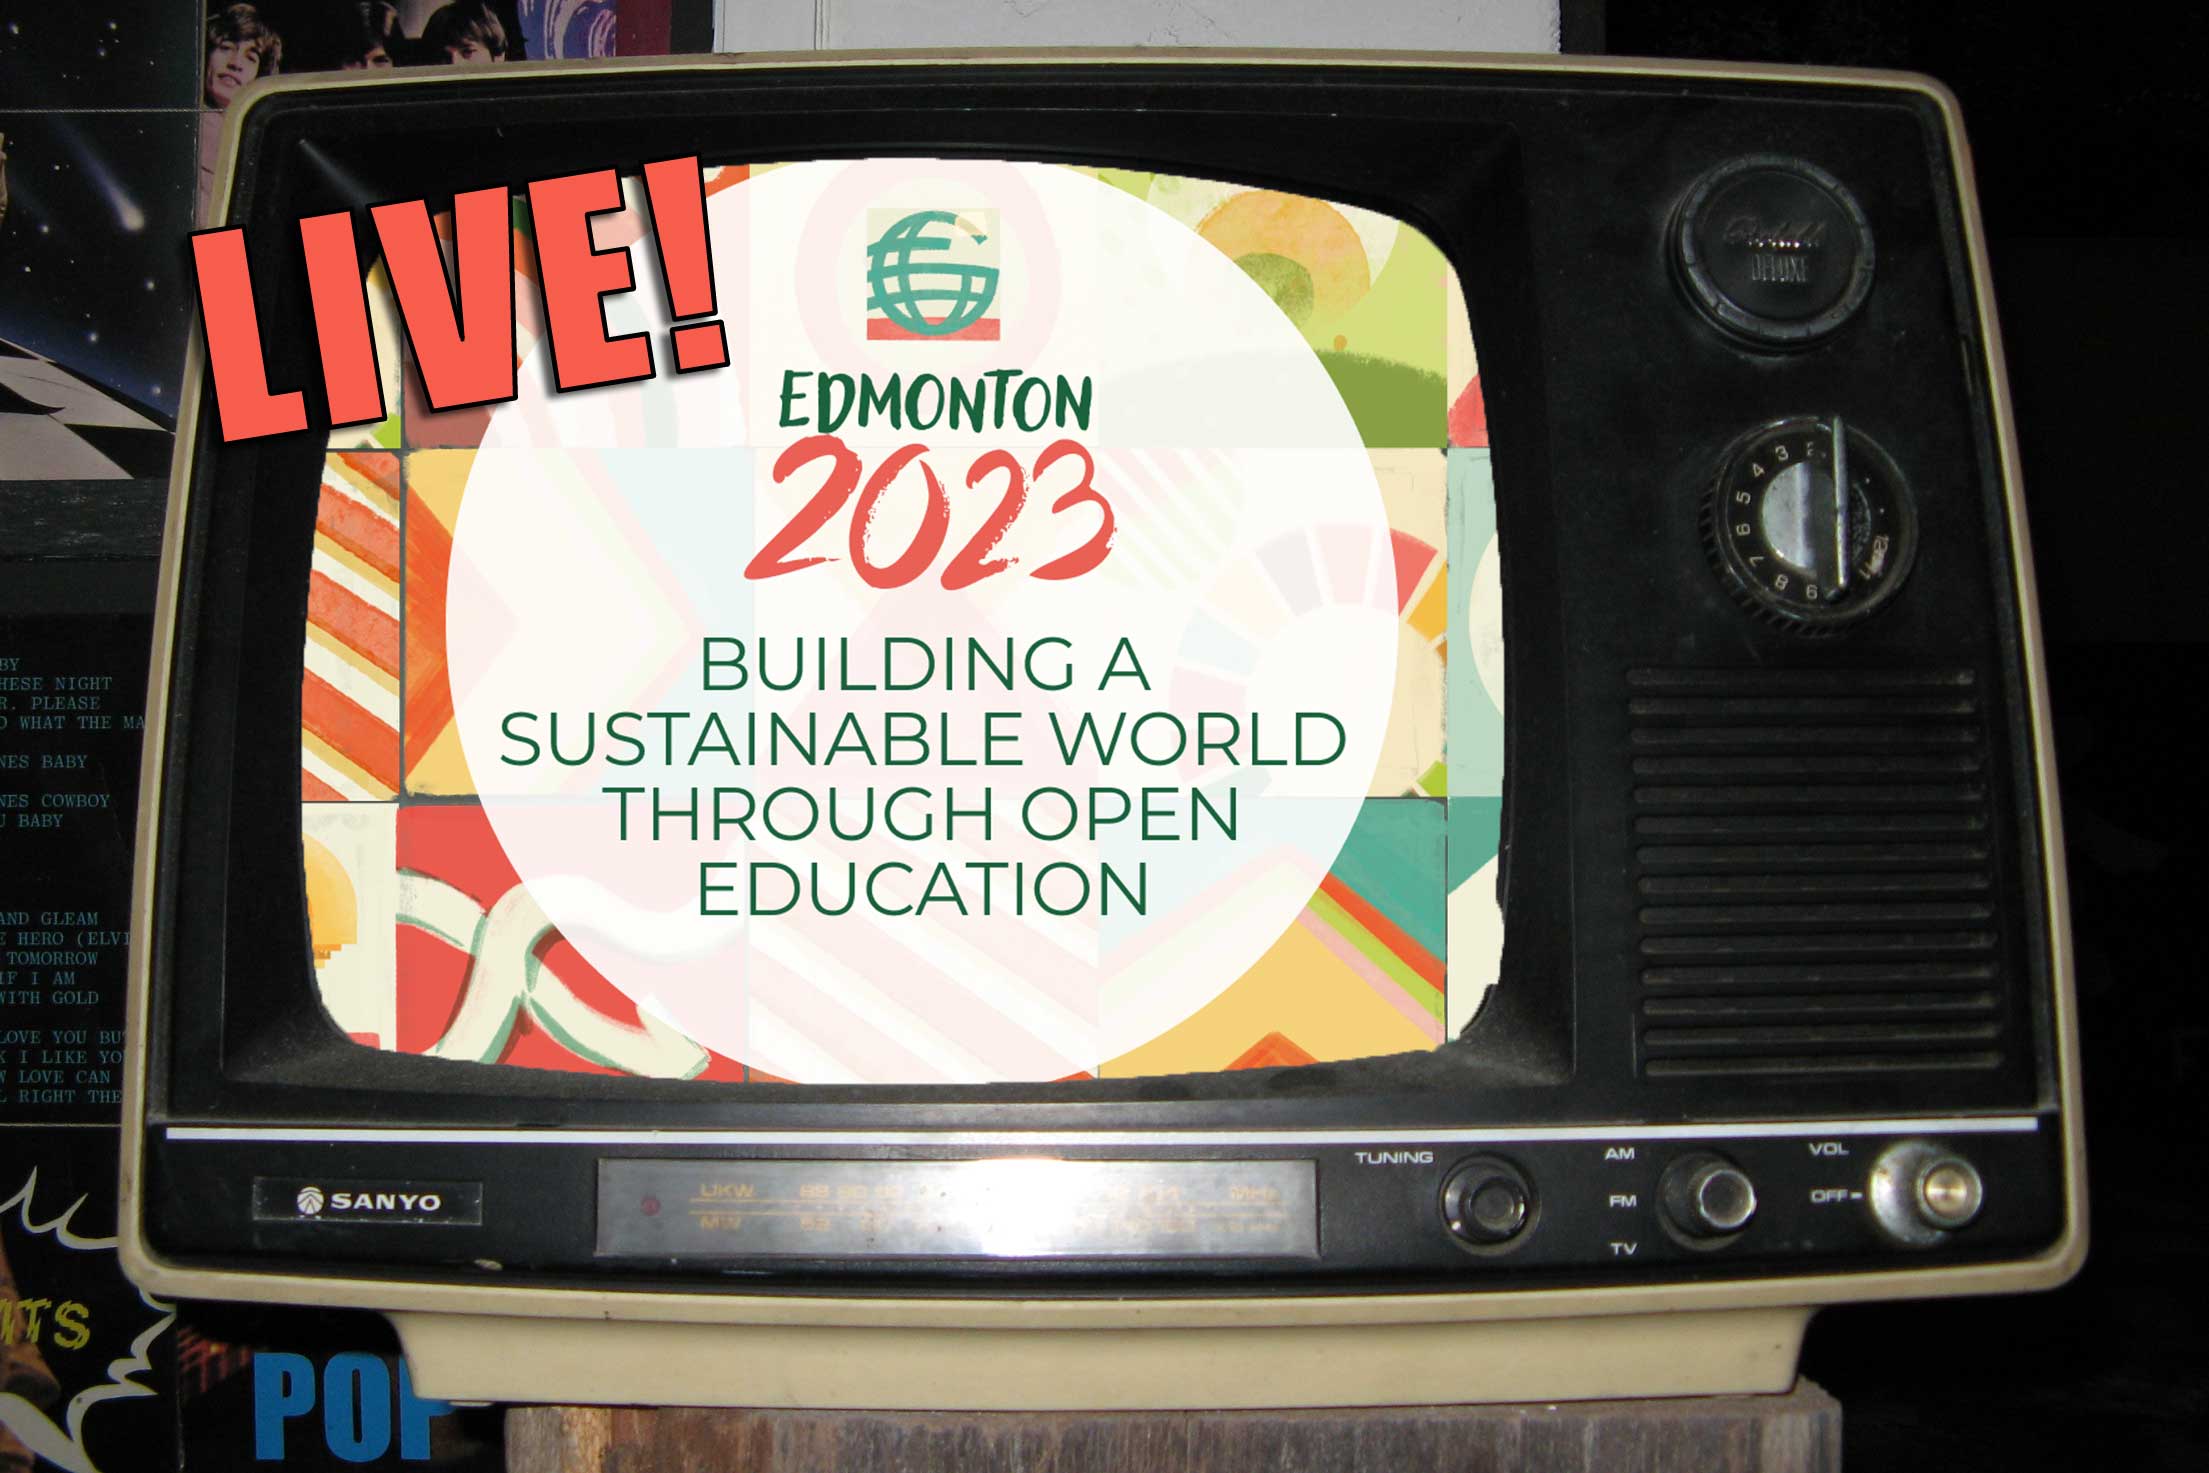 Old TV screen displaying large text reading "LIVE!" atop the  conference title, Building a Sustainable World through Open Education